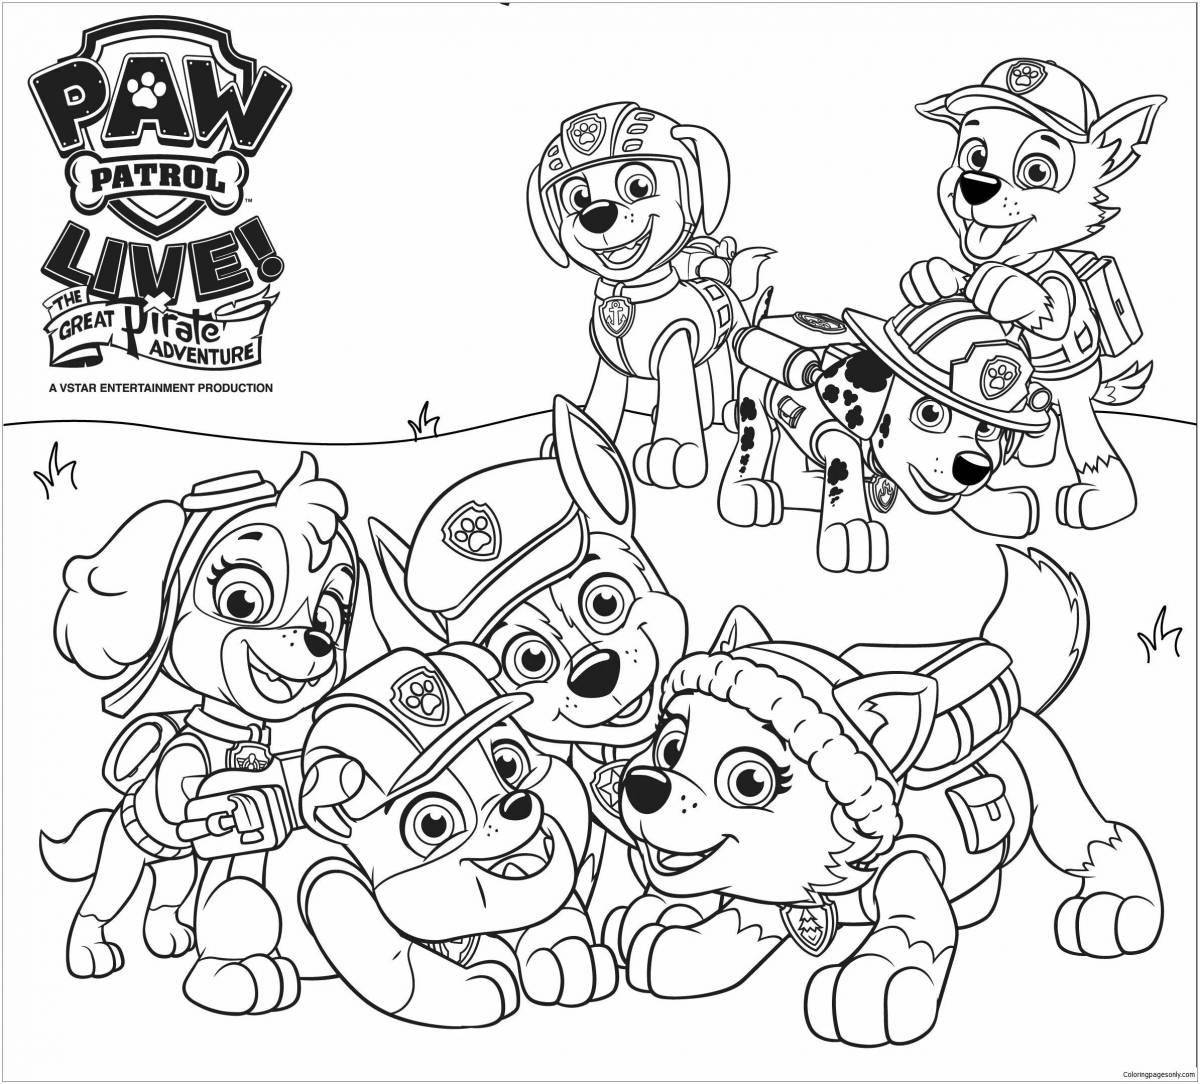 Paw patrol pirates deluxe coloring book